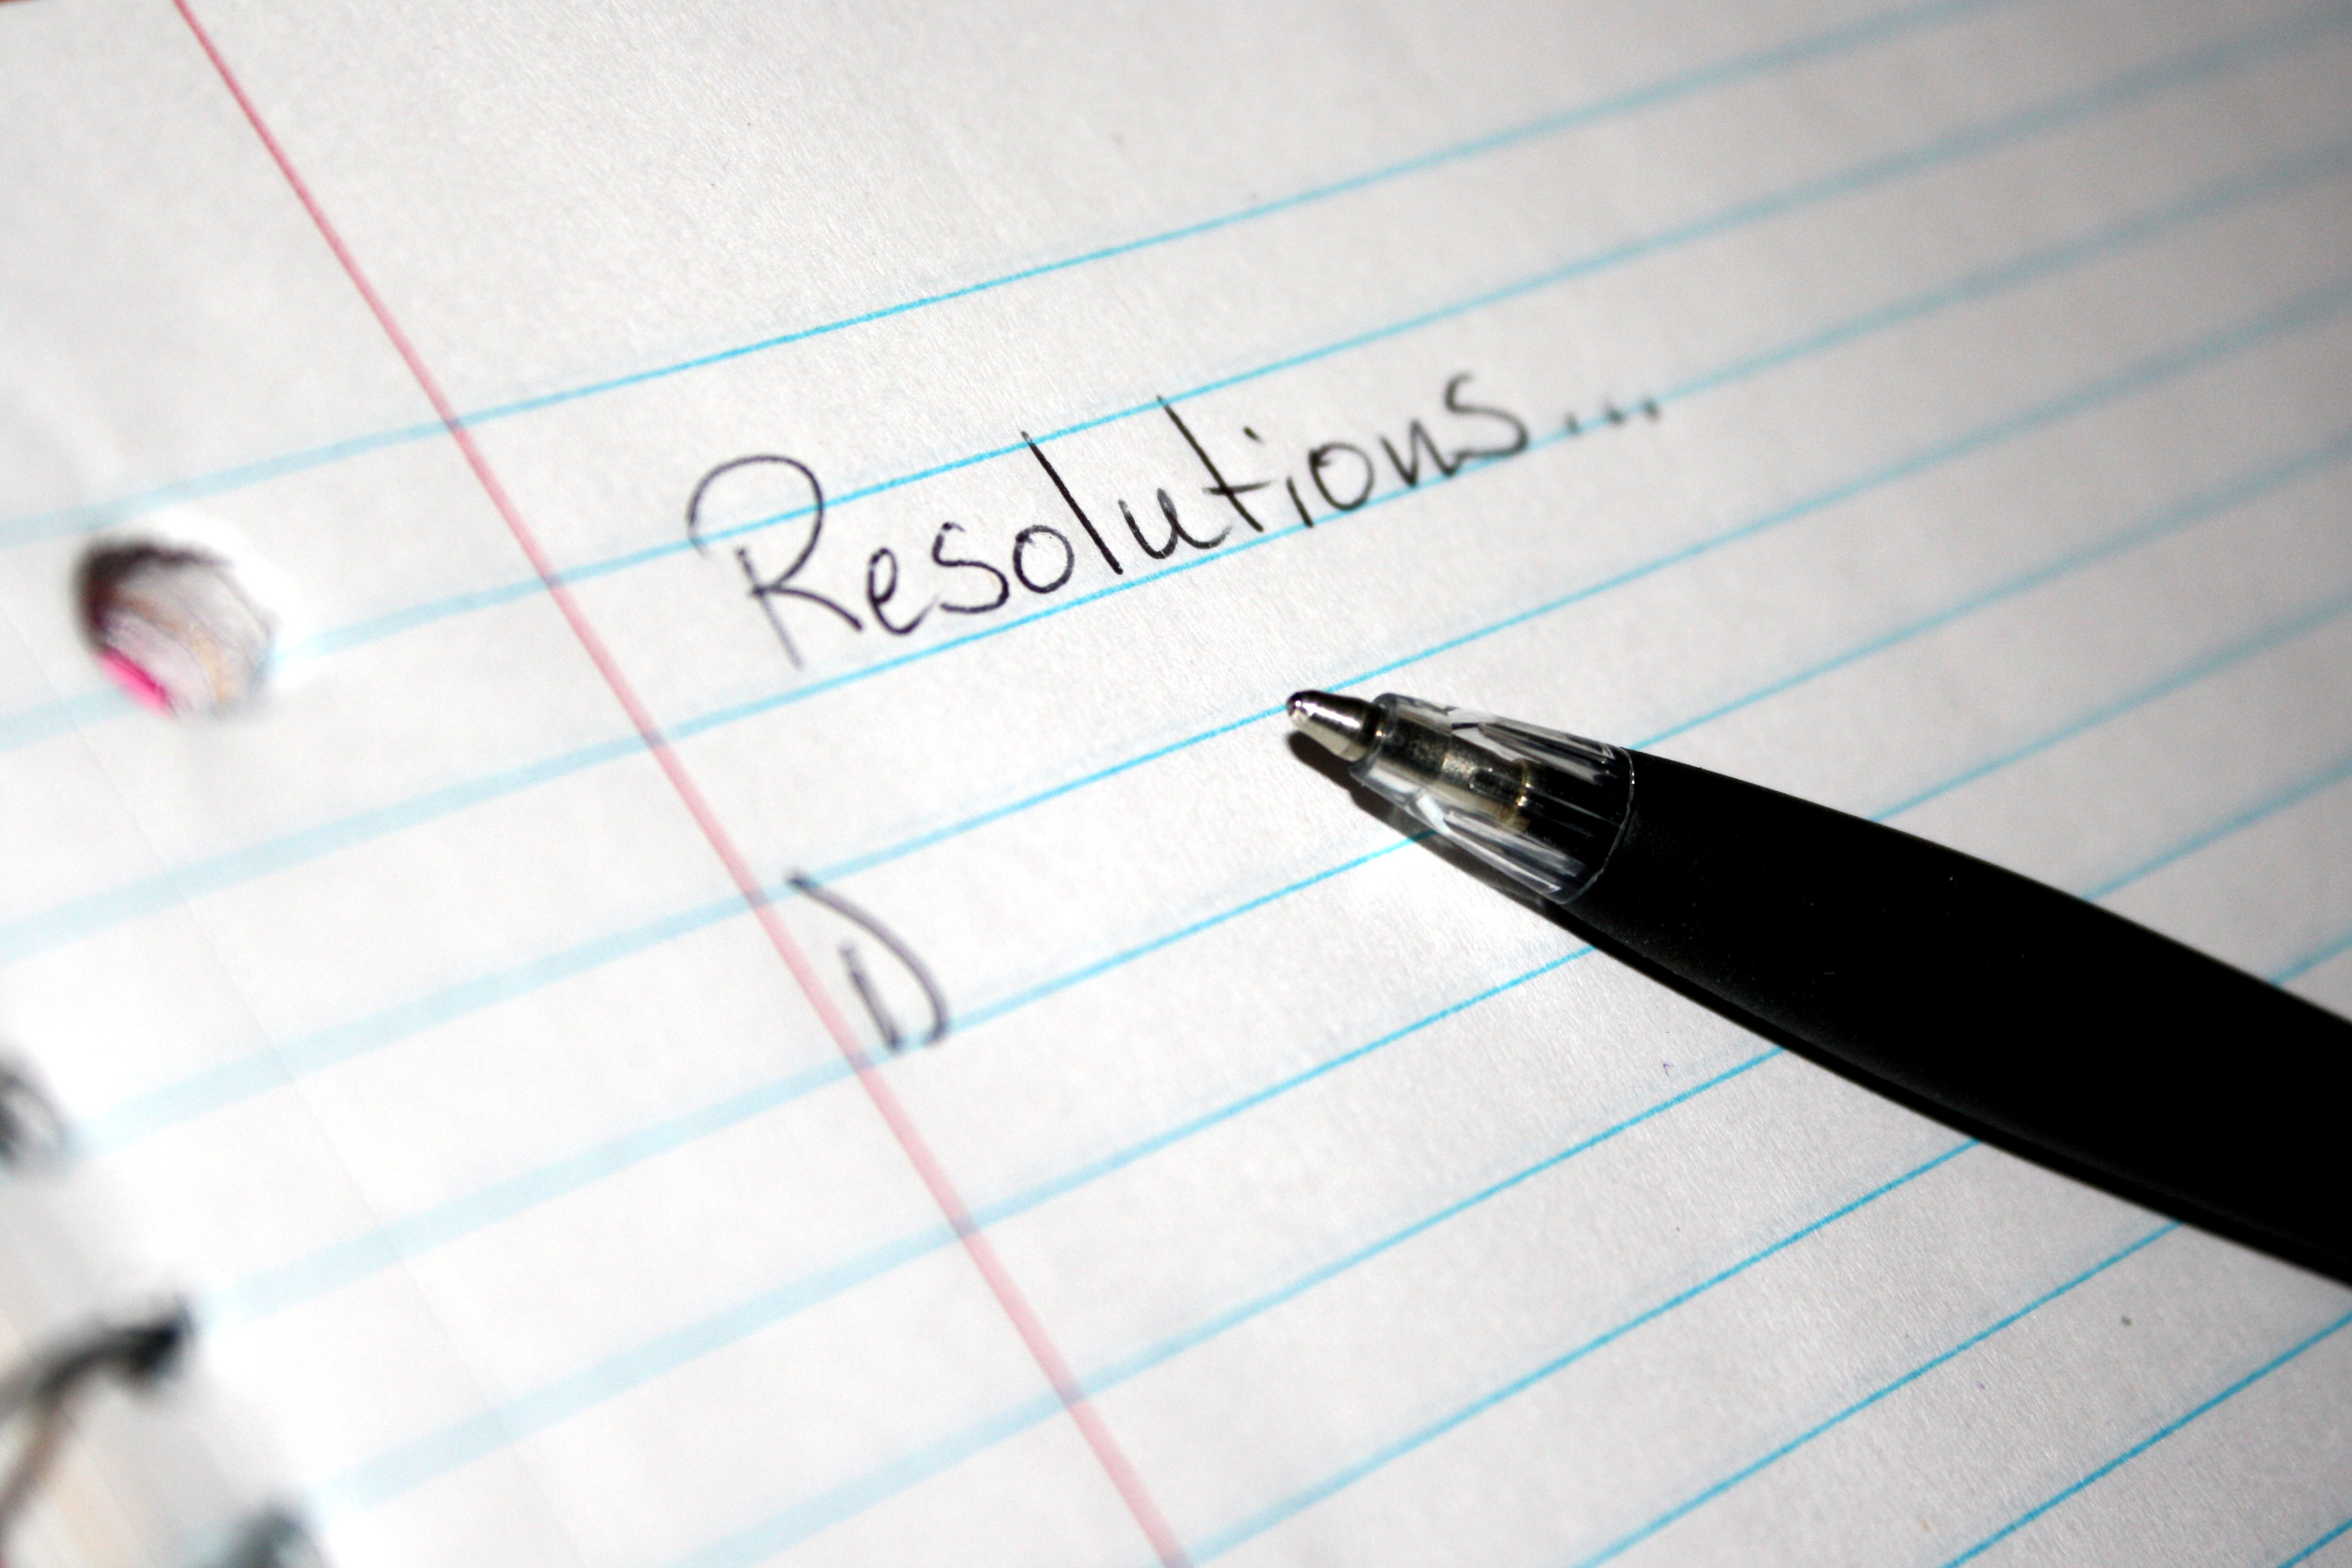 New Year Resolutions list